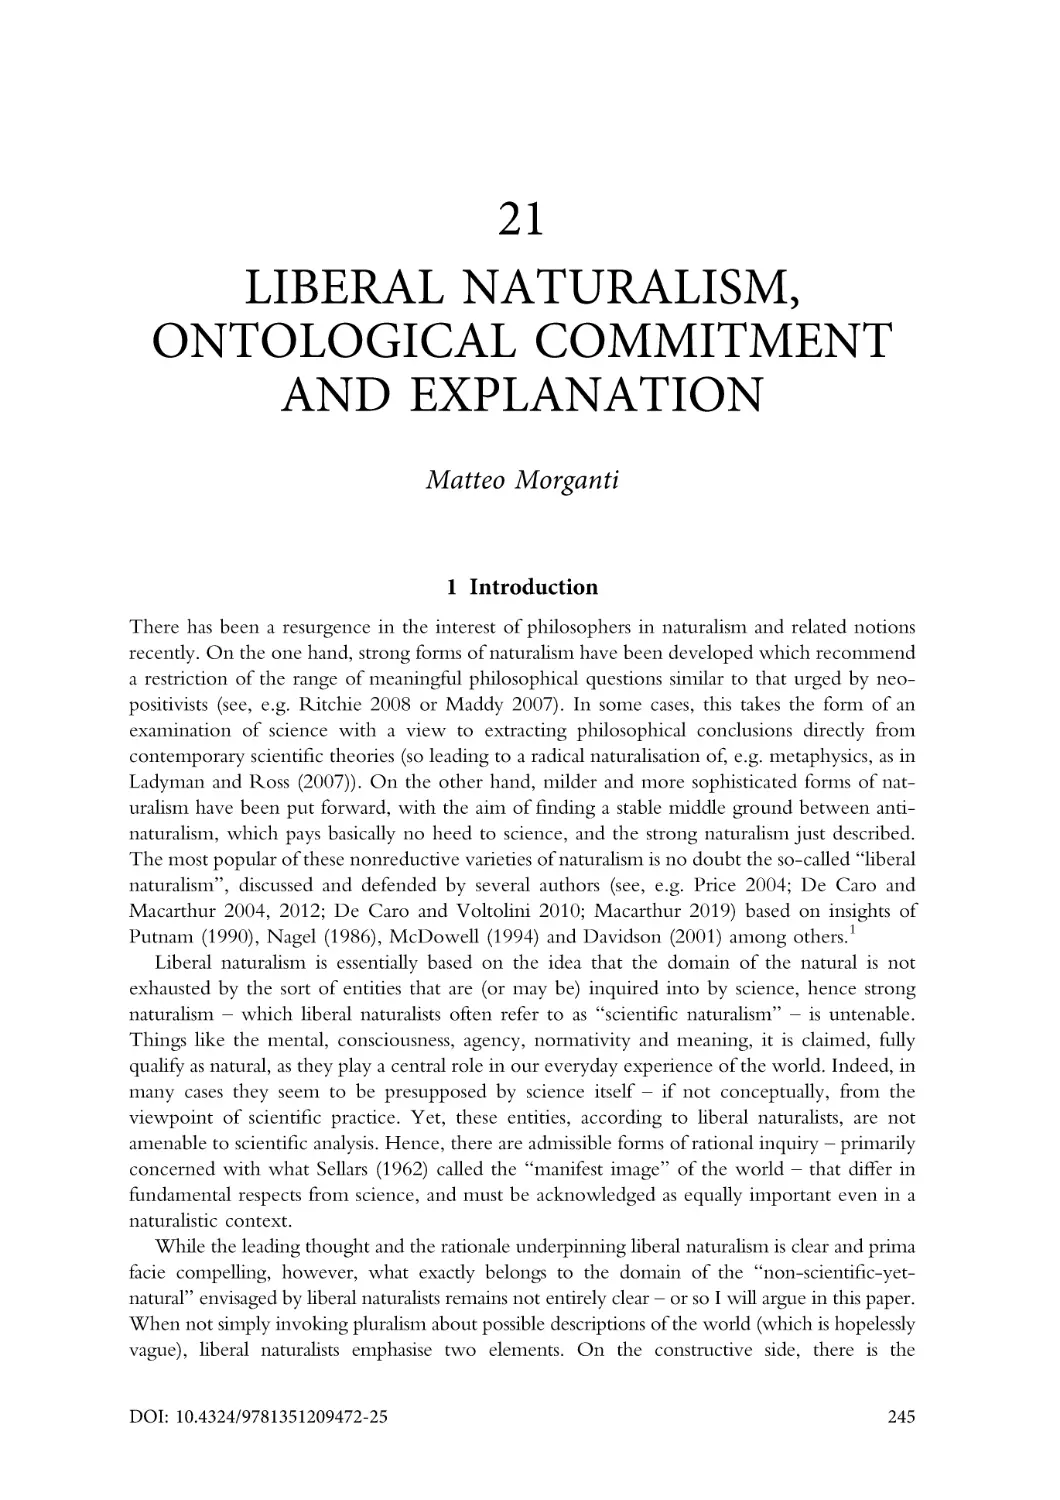 21. Liberal naturalism, ontological commitment and explanation
1. Introduction